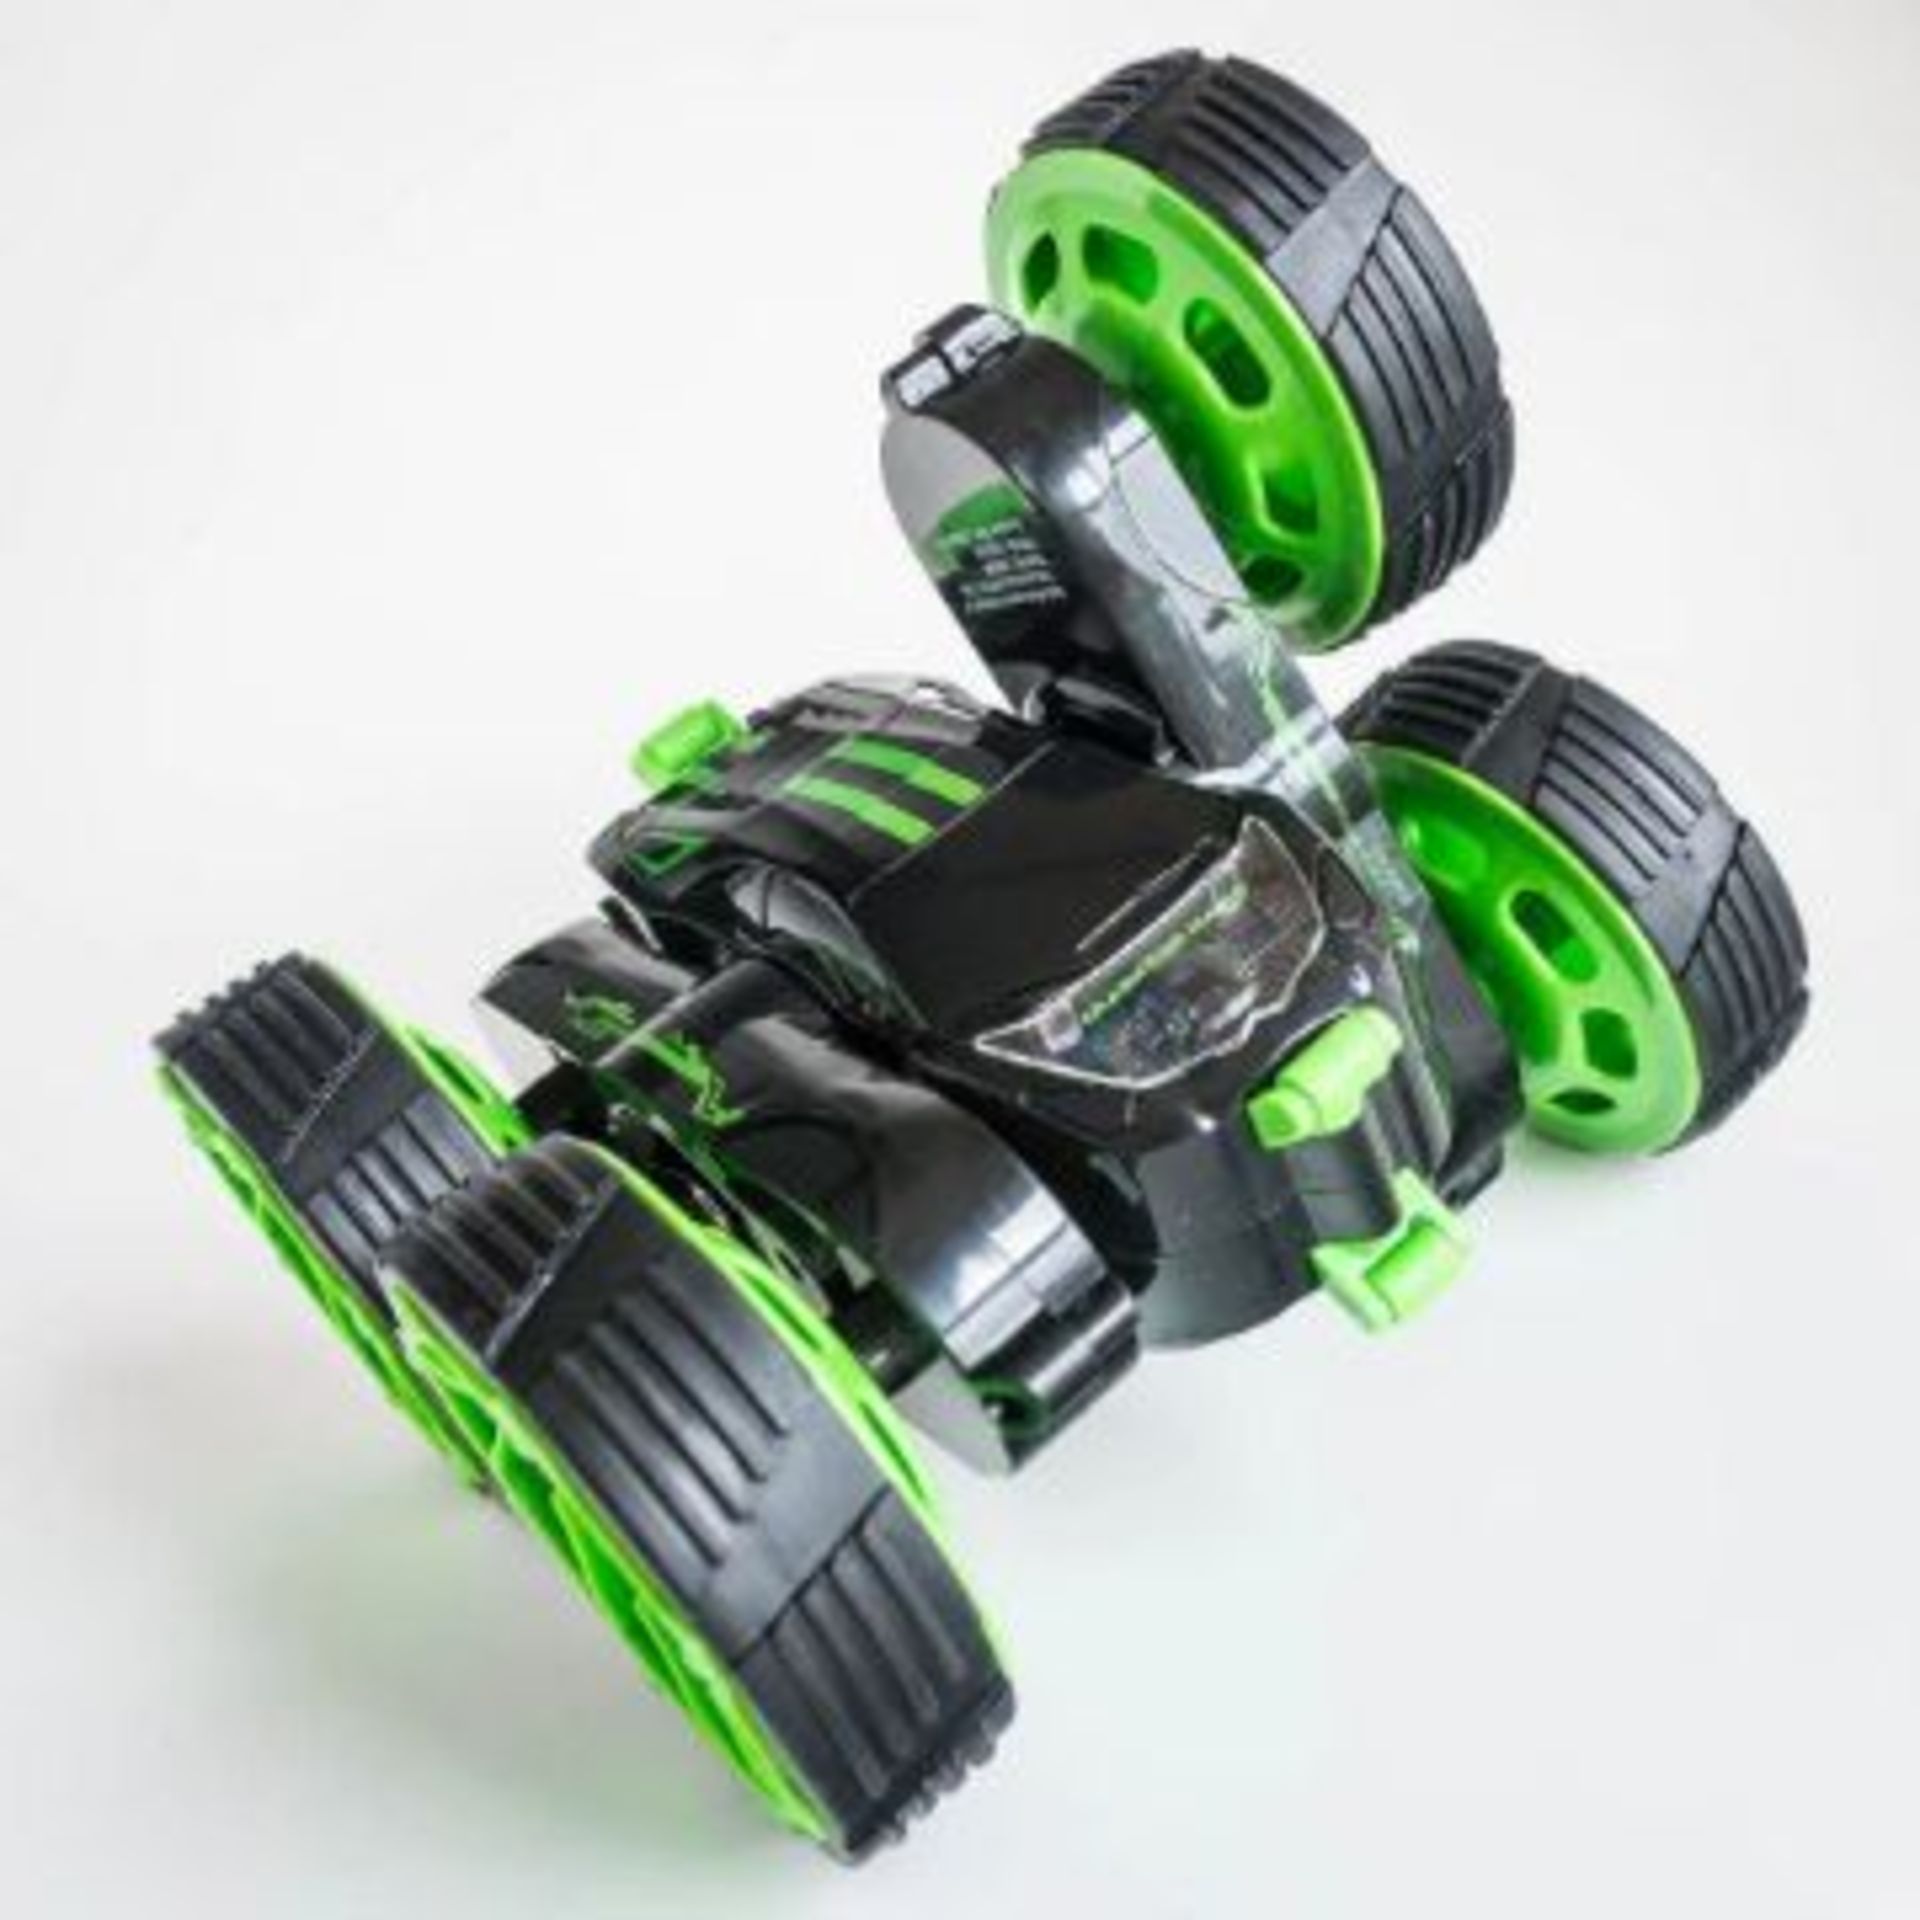 No Vat!! 6X Red5 Ghost 360° Spin Stunt Rc Car RRP £25 Each. Spares & Repairs!! - Image 4 of 6